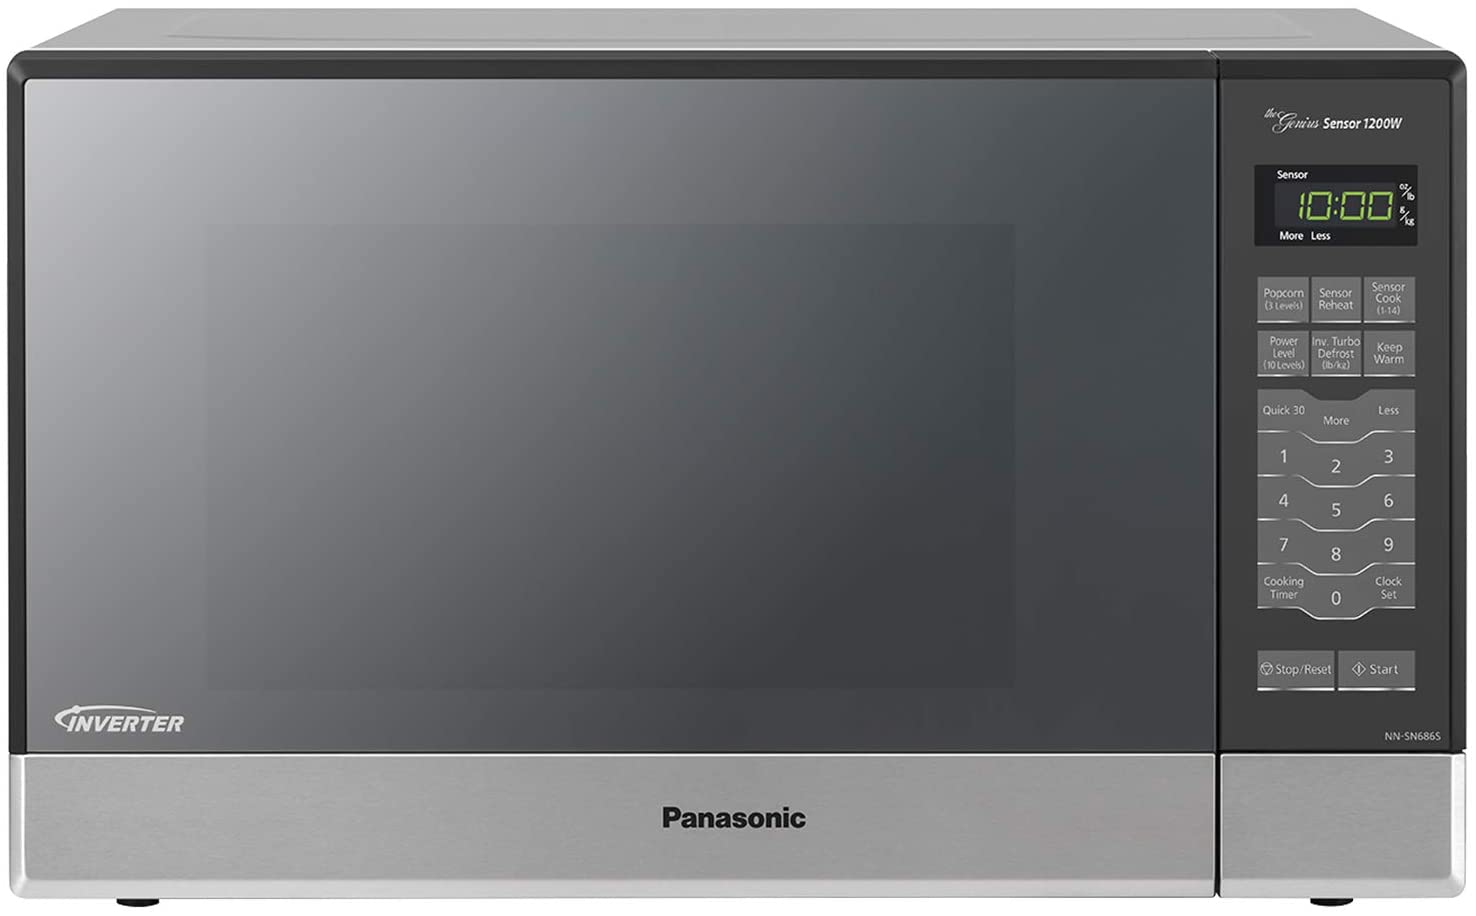 2. Microwave Oven with Stainless Steel Countertop by Panasonic